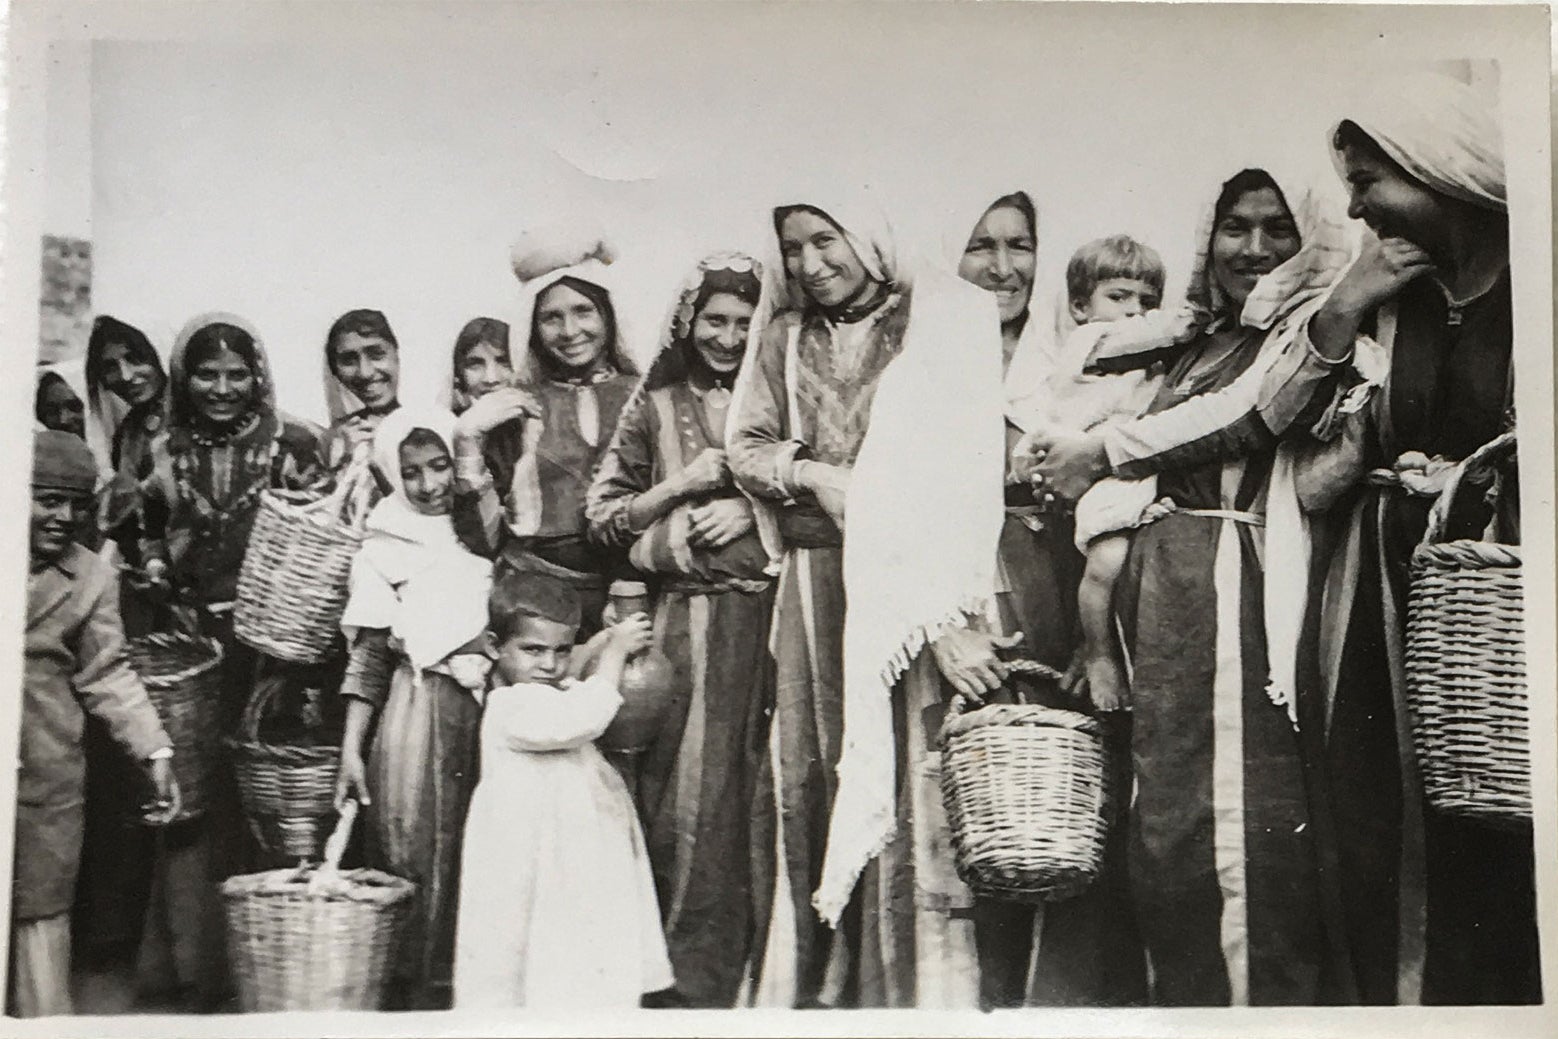 The Forgotten Palestinians: A History of the Palestinians in Israel